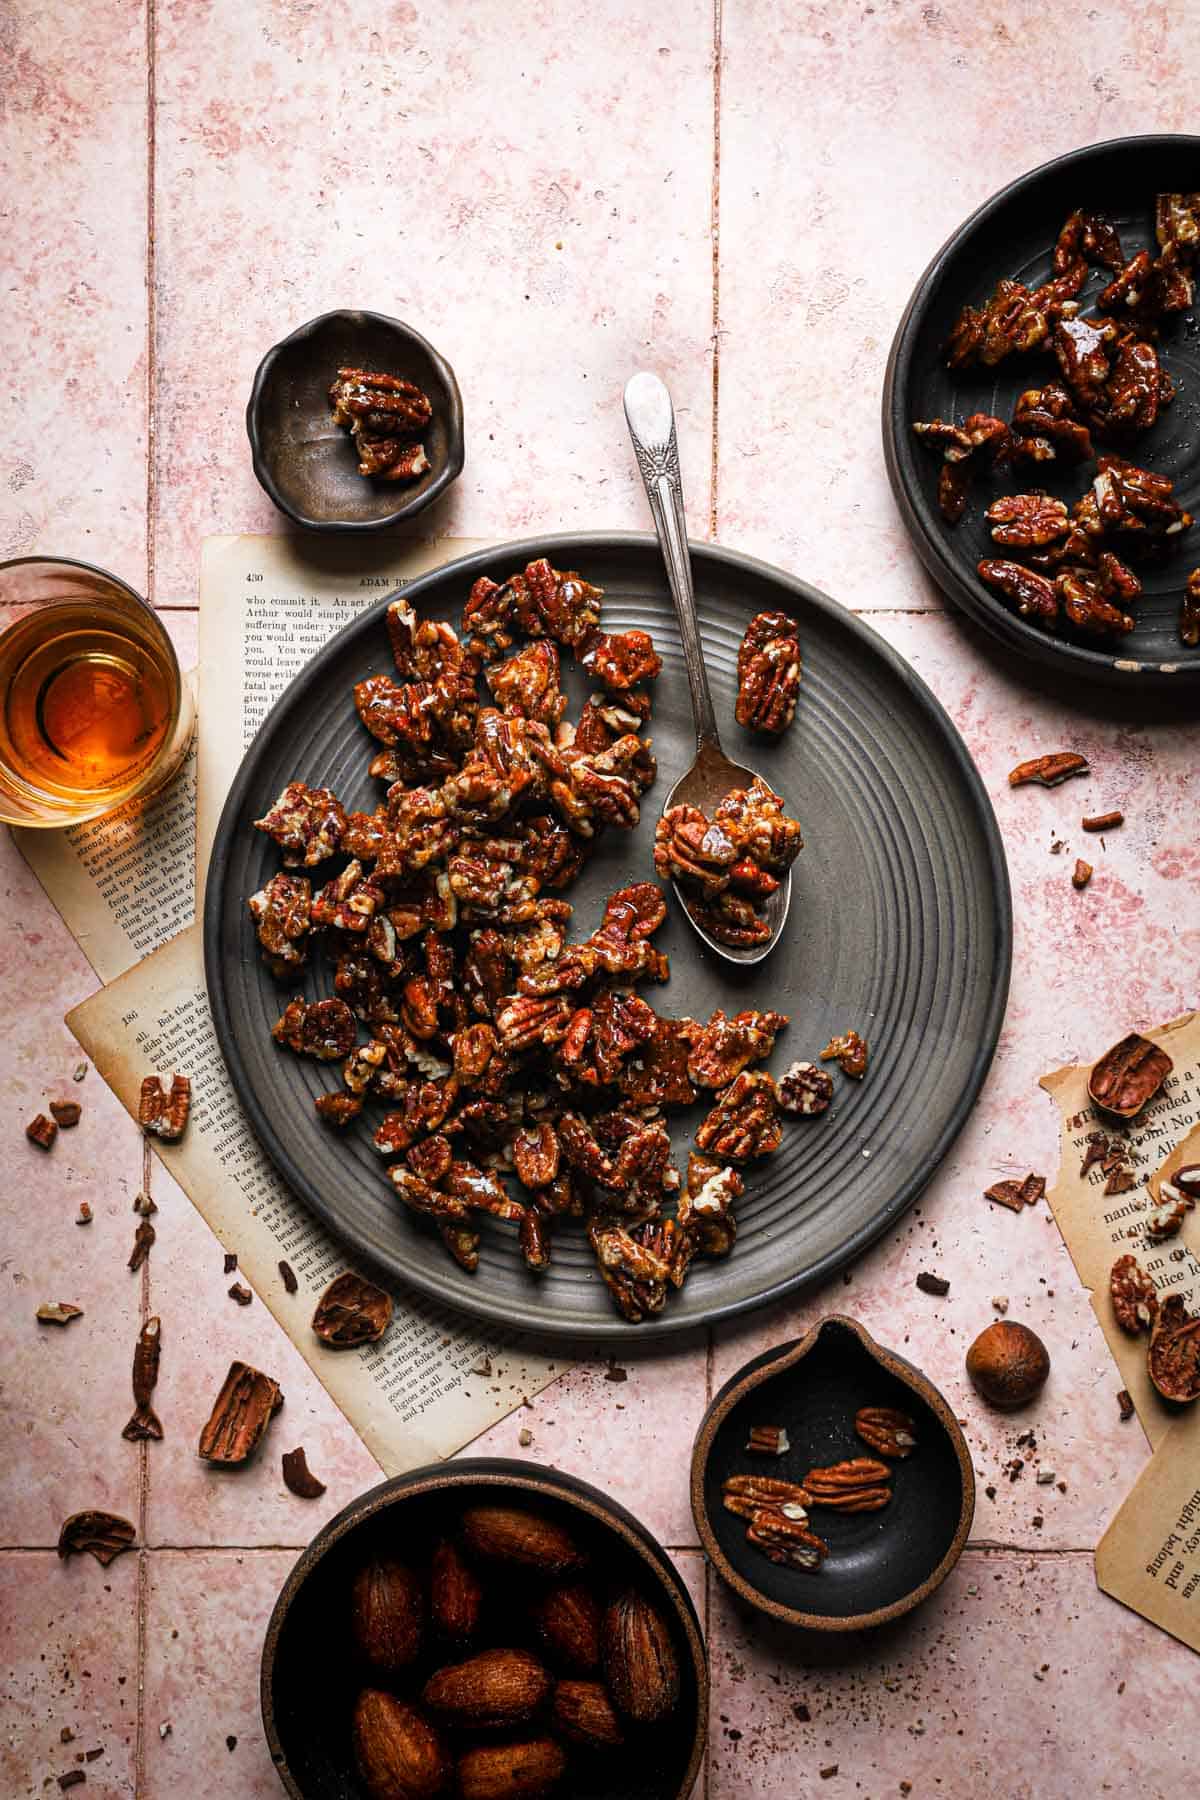 Candied pecans on stovetop recipe.